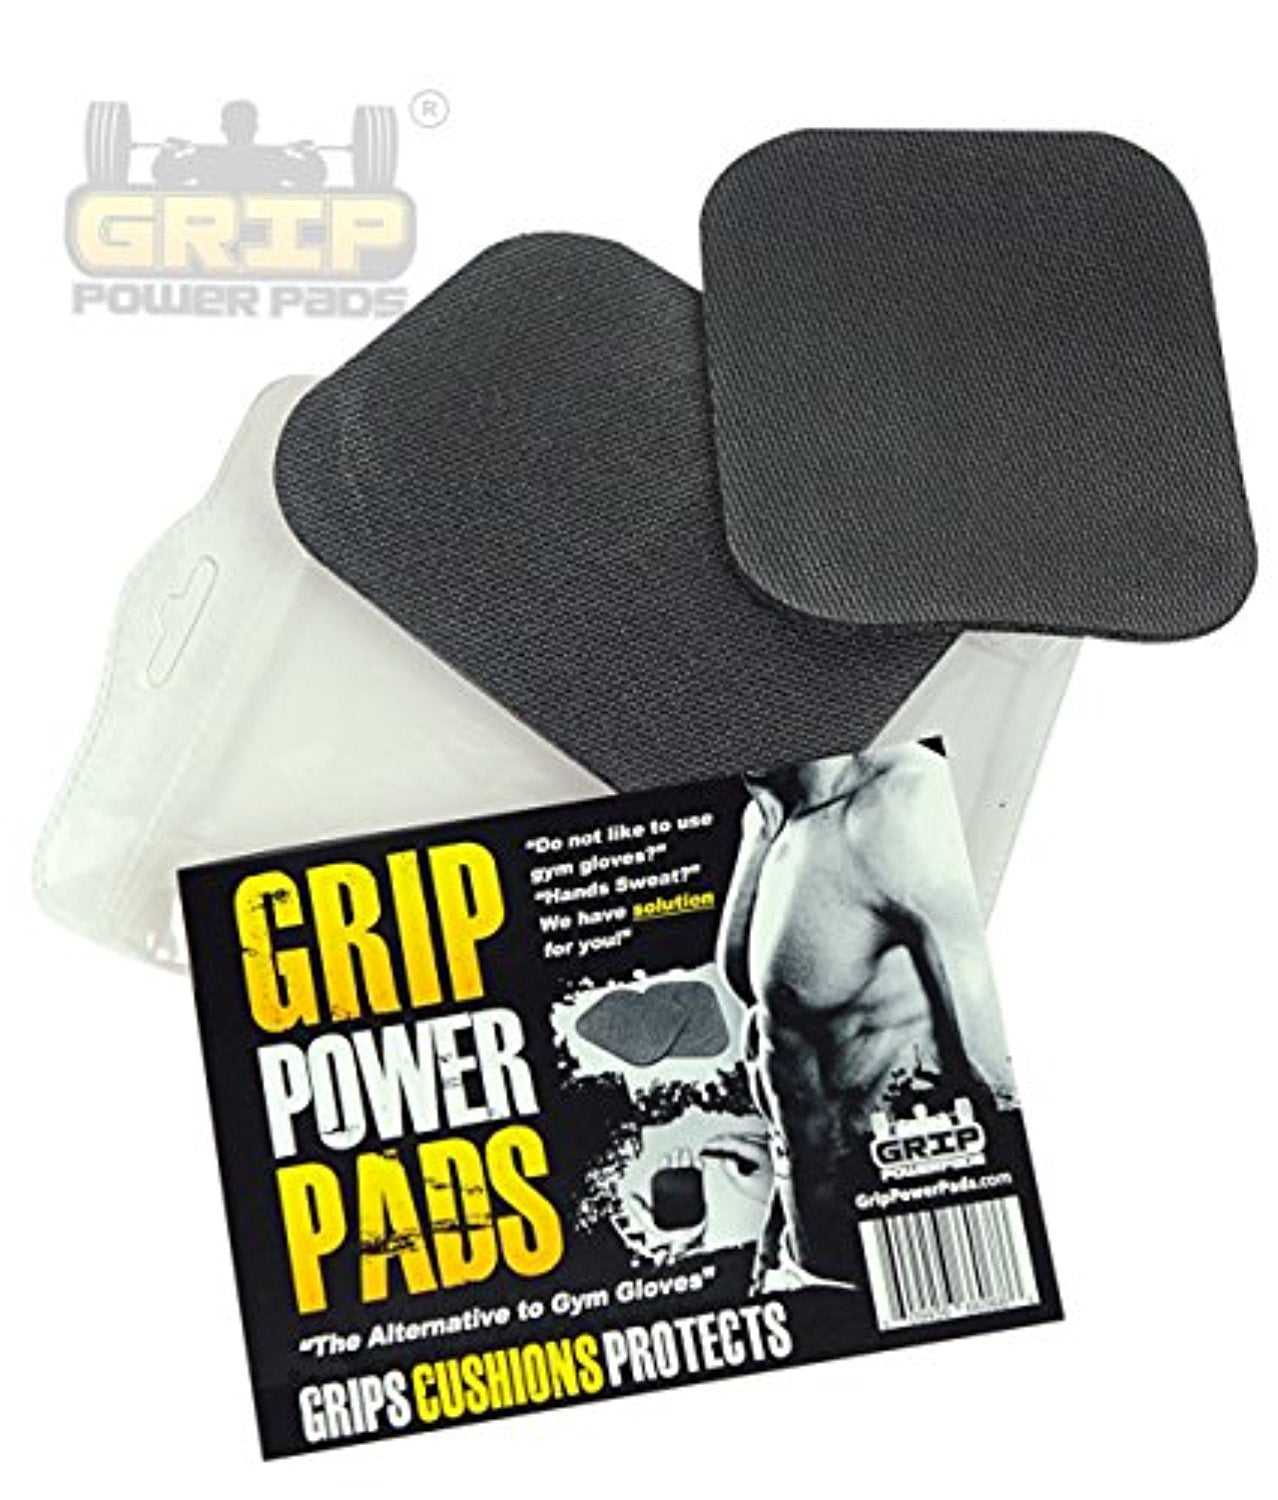 Fitness Gloves Grip Power Pads PRO - Lifting Grips The Alternative